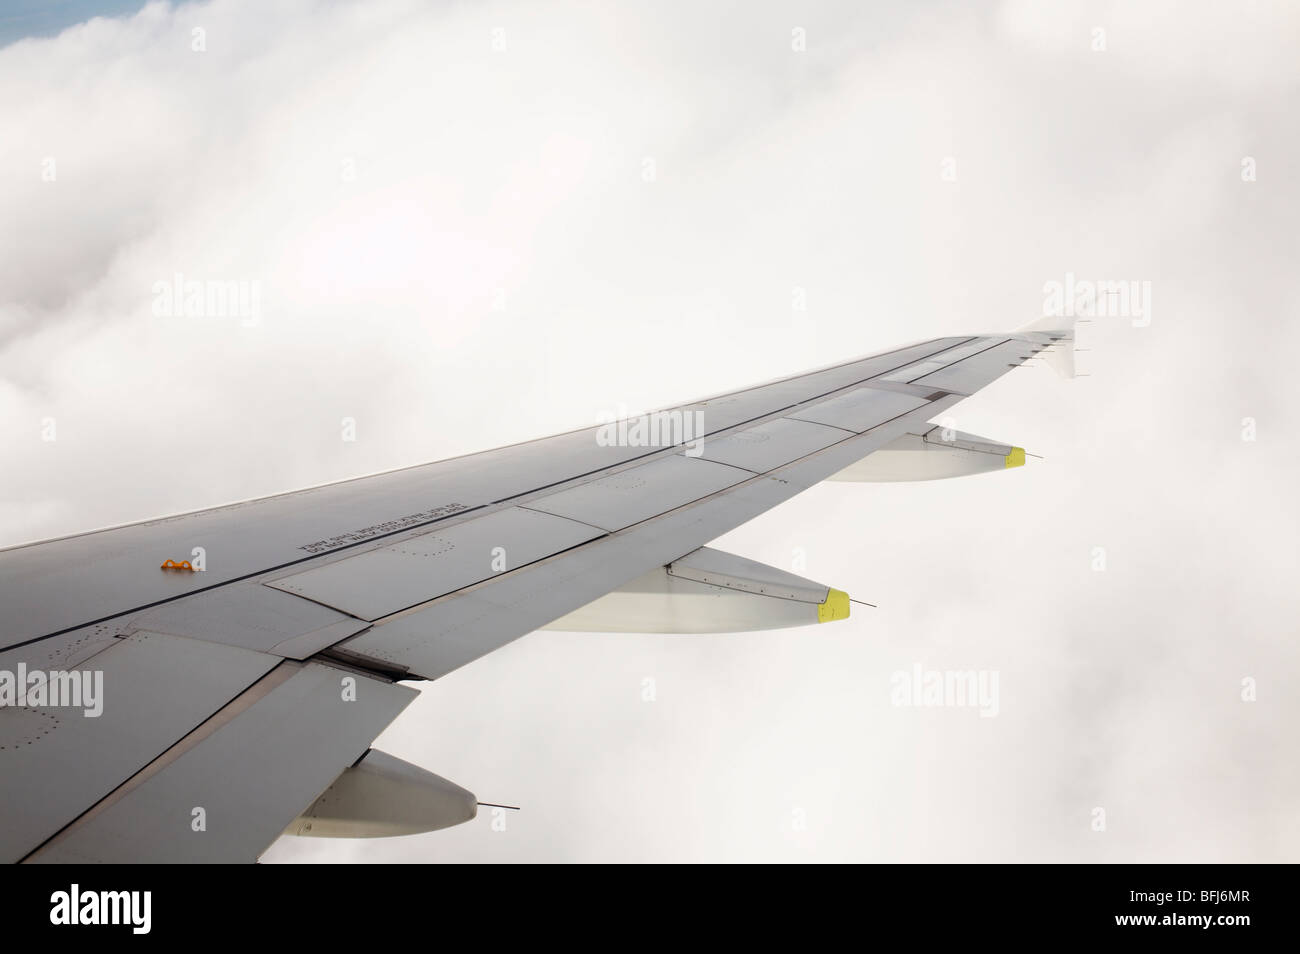 A wing on an aeroplane, France. Stock Photo